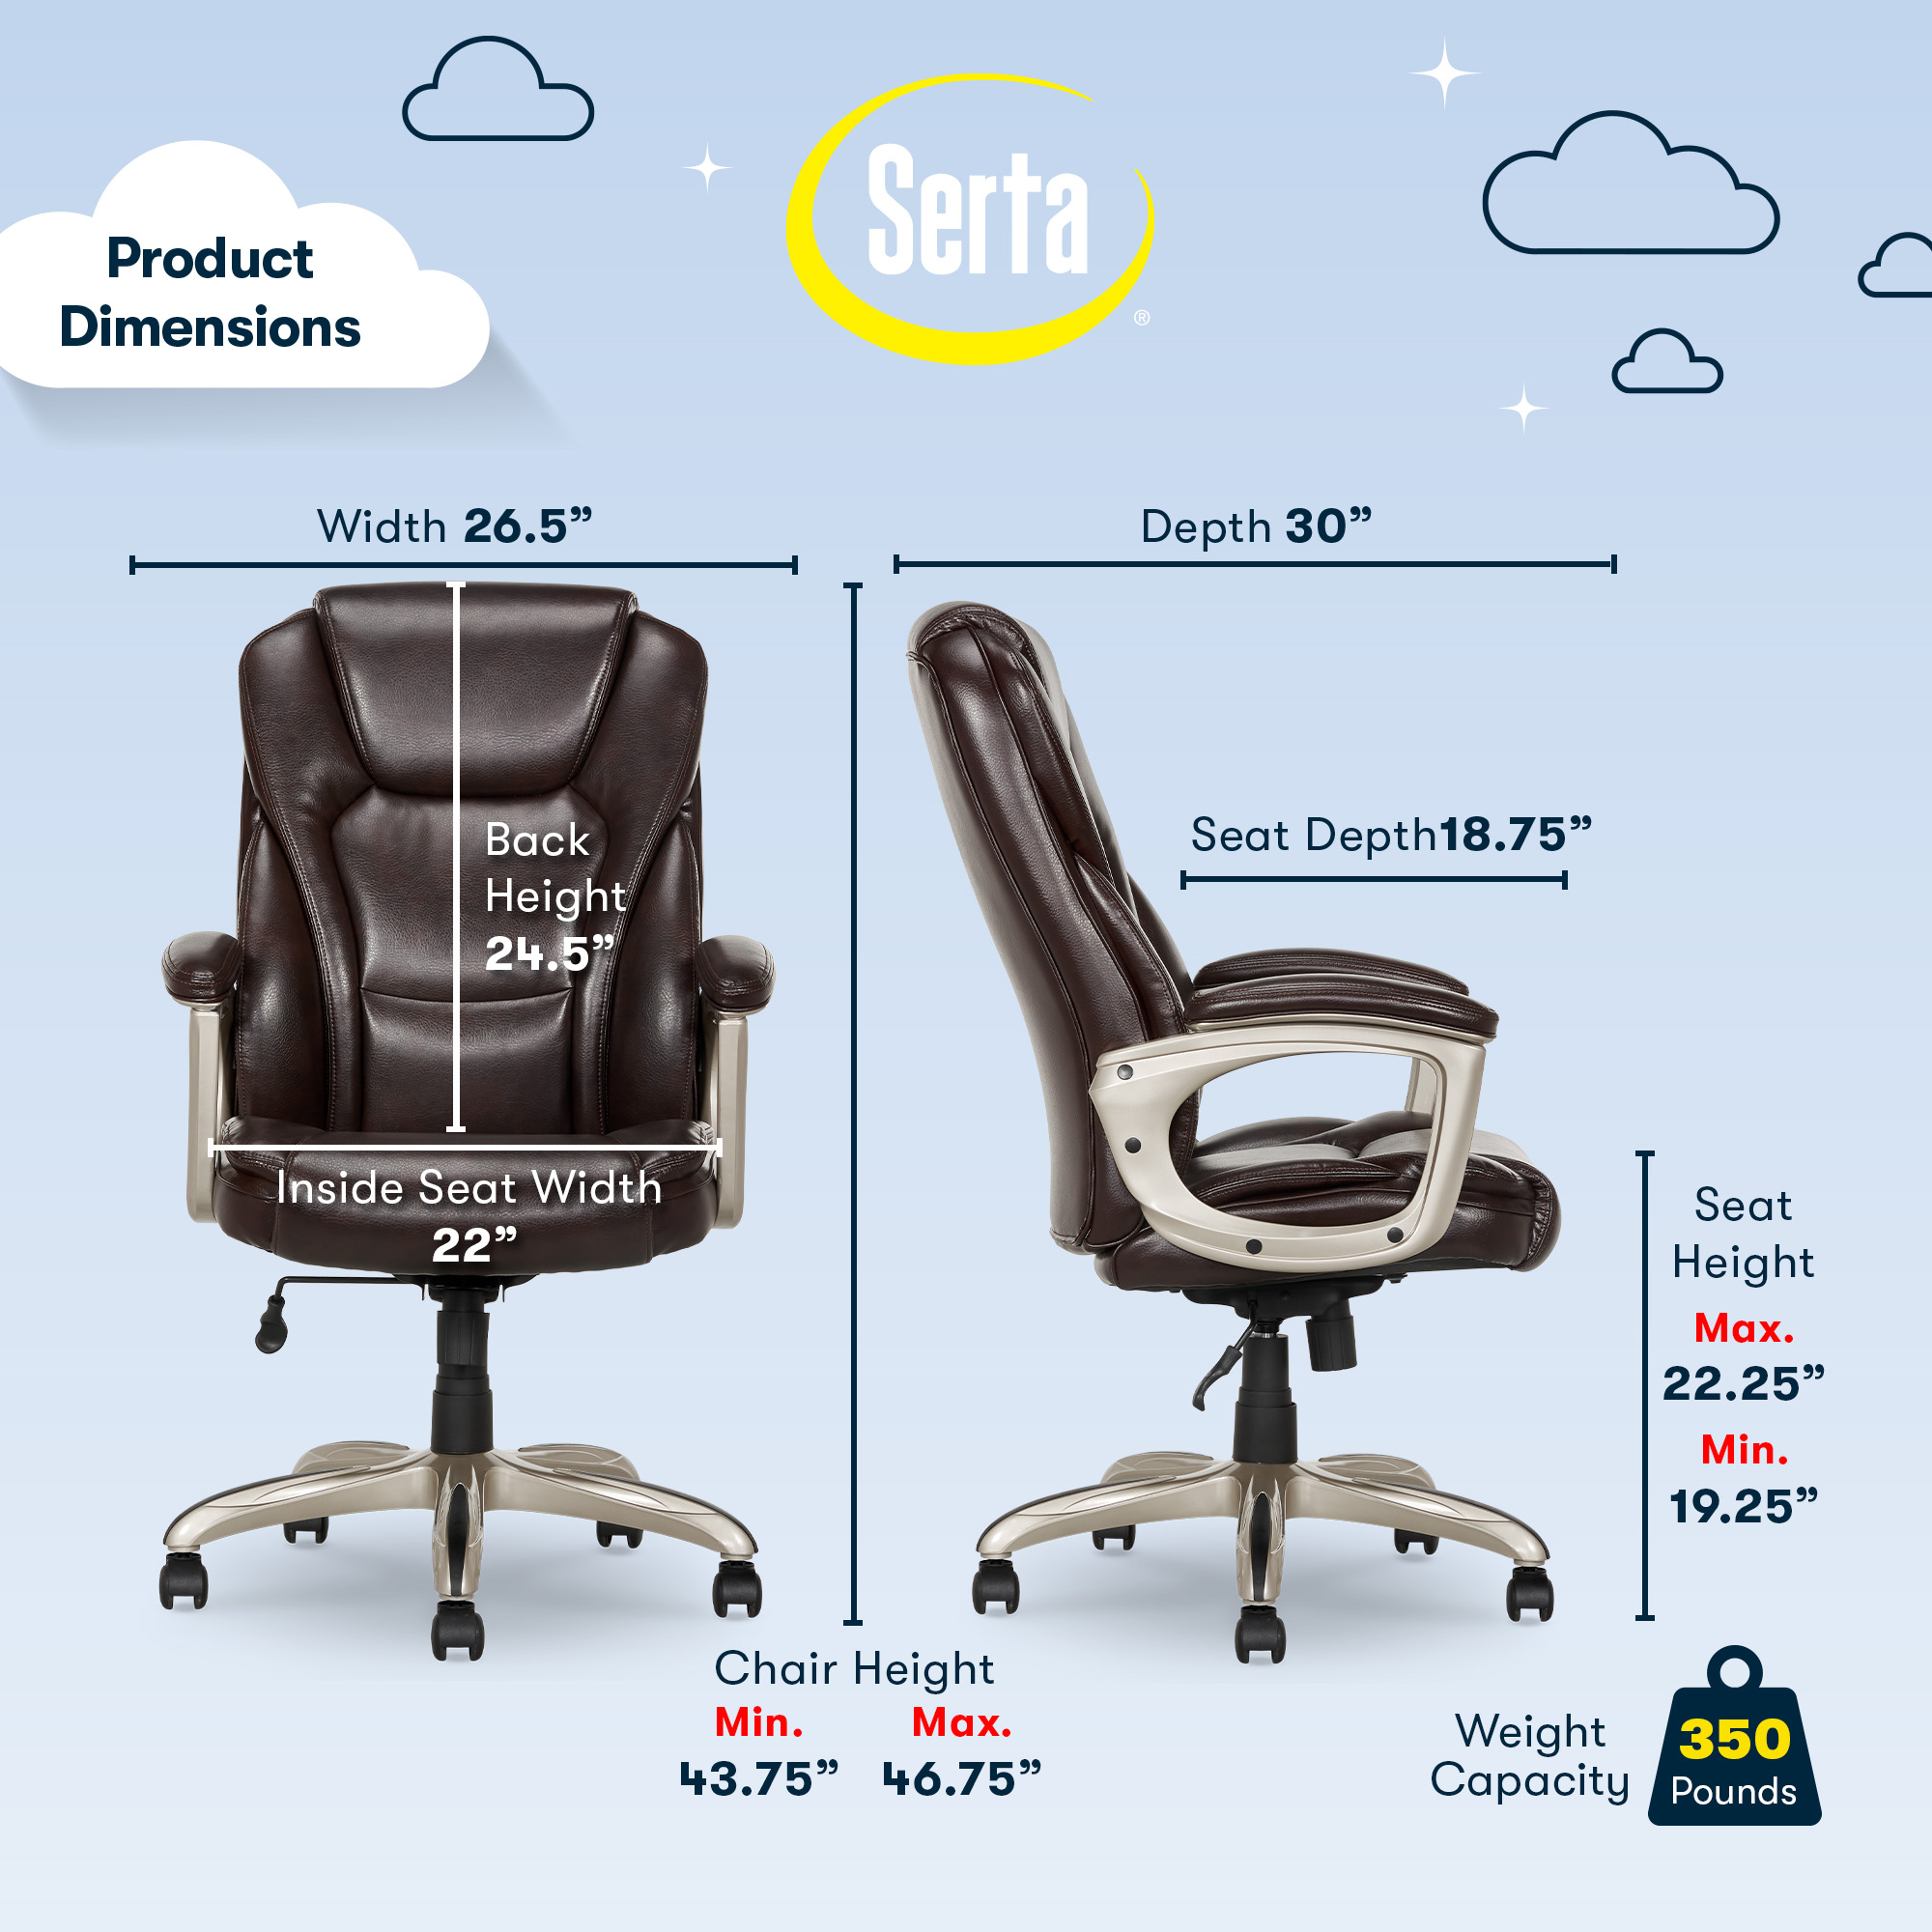 Serta Heavy-Duty Bonded Leather Commercial Office Chair with Memory Foam, 350 lb capacity, Brown - image 4 of 8